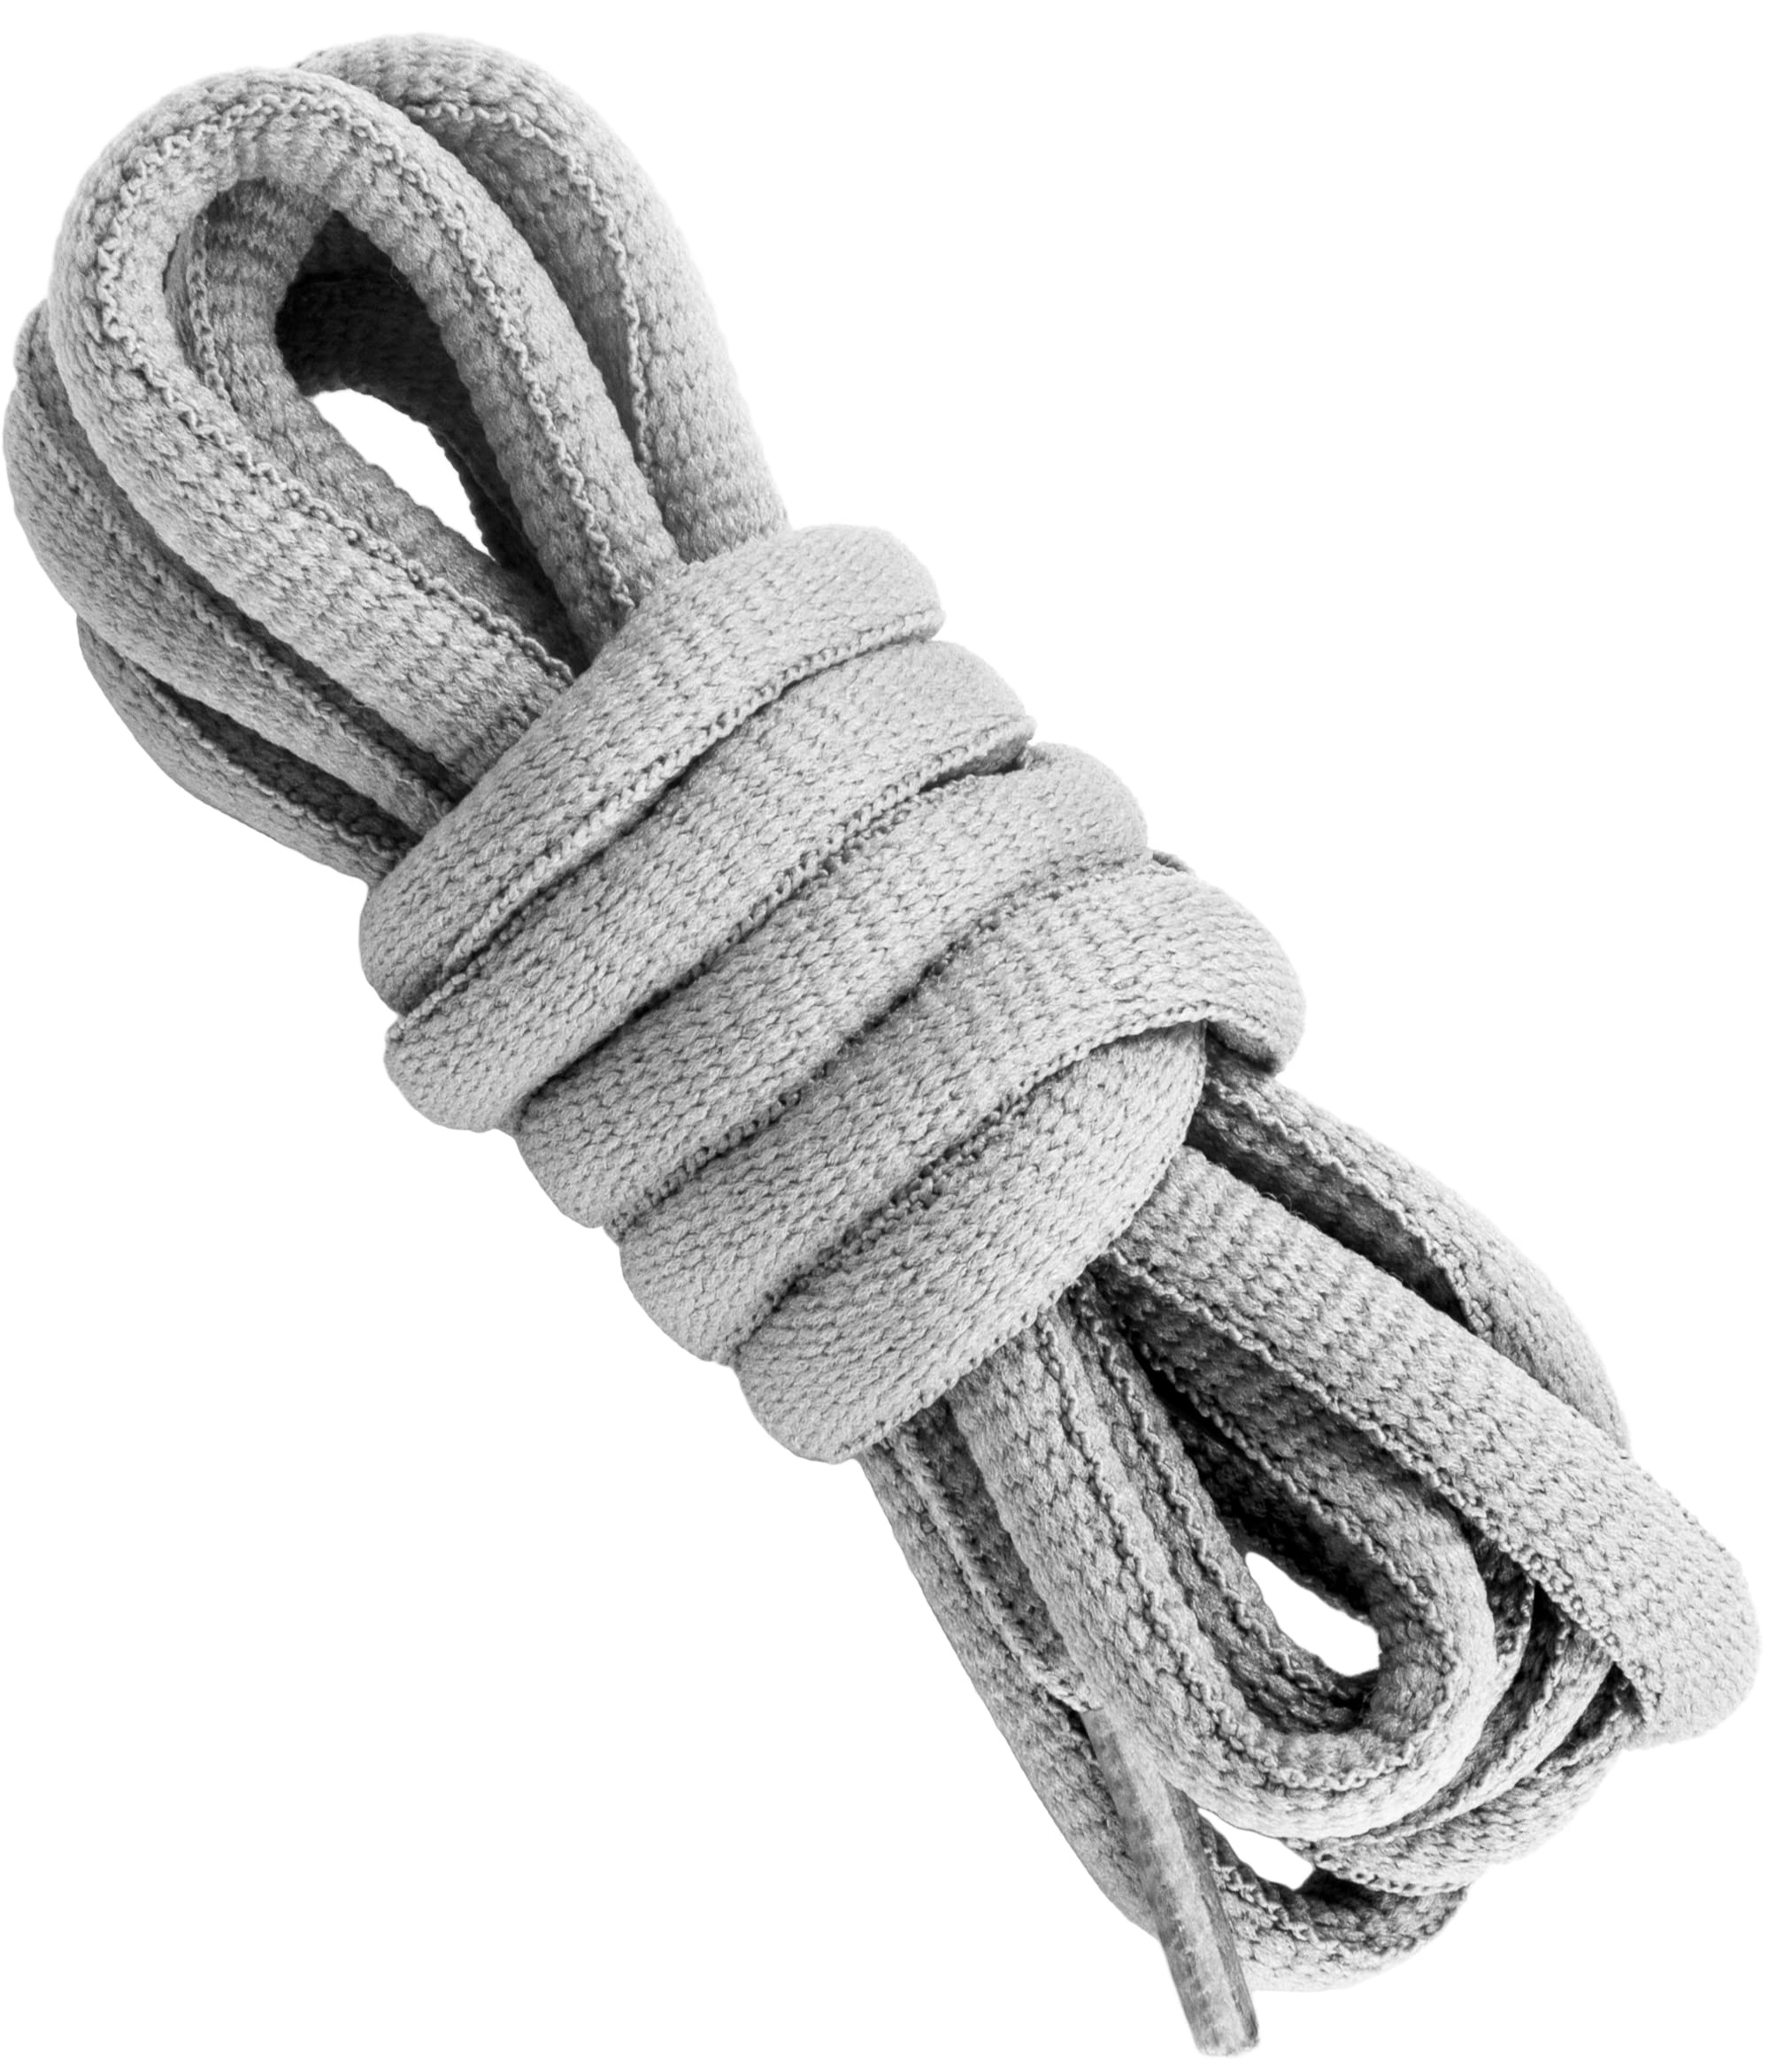 Tolumo Diameter 9 MM Round Durable Boot Laces Lengths 140 to 180 CM Shoelaces for Work and Leisure Boots, Hiking Shoes Light Grey 140 CM 1 Pair